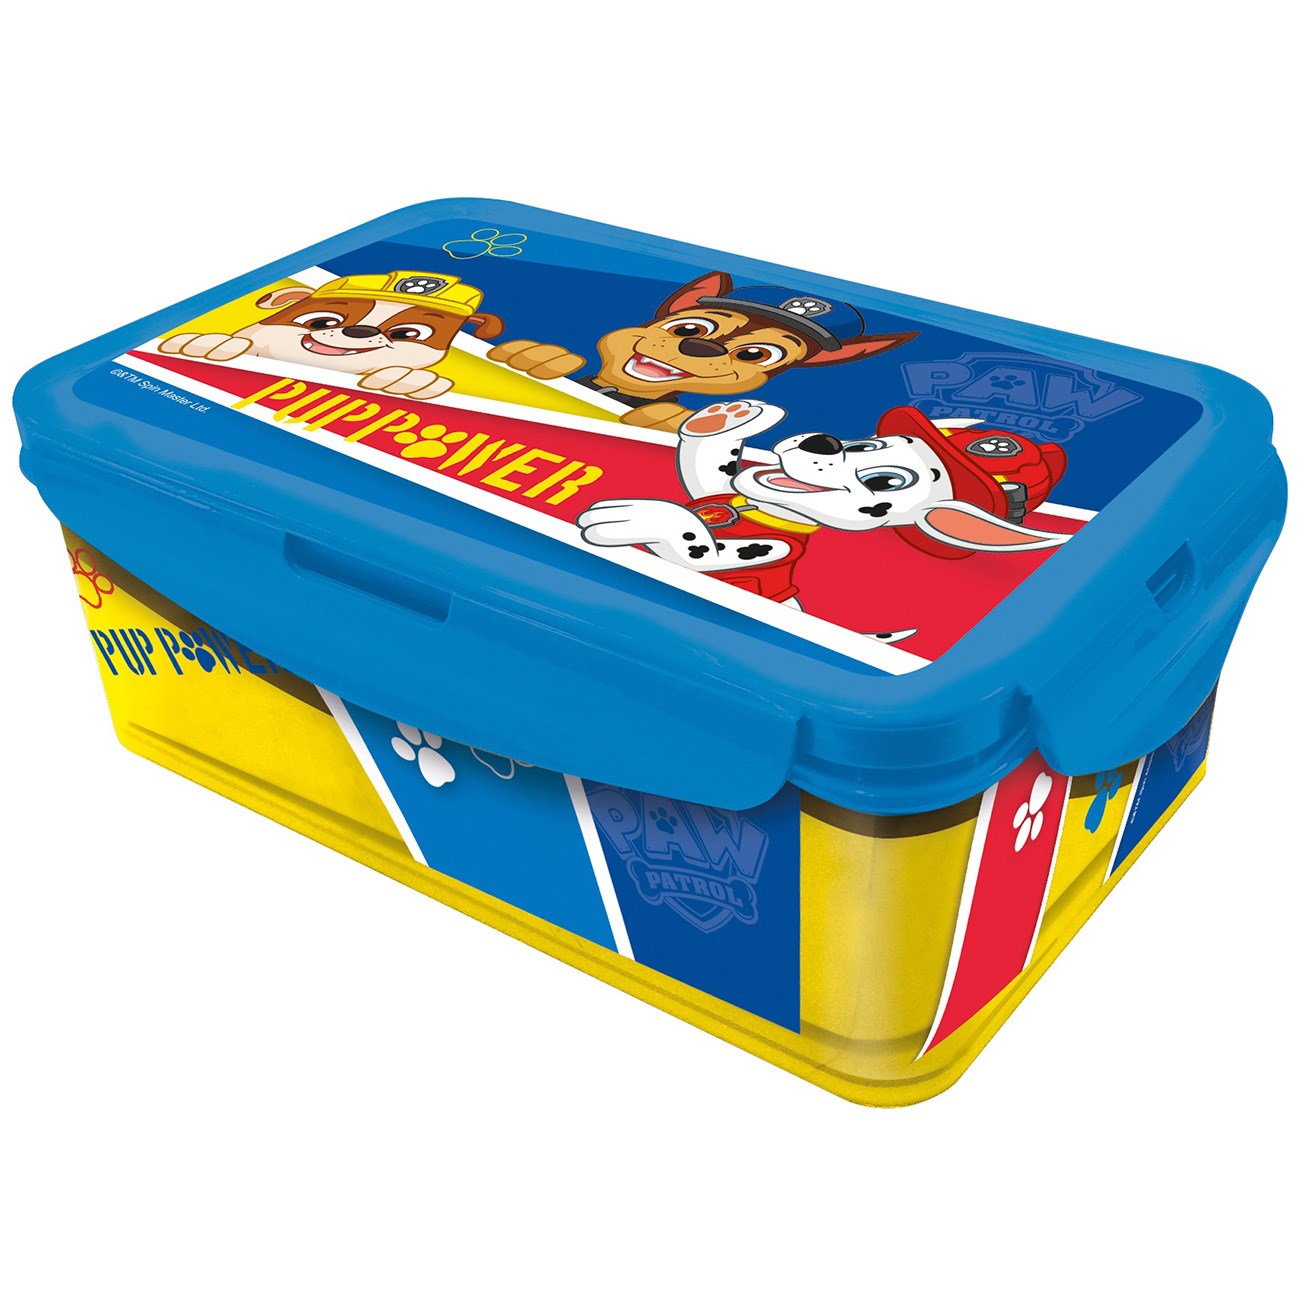 Euromic Large Paw Patrol Lunchbox with Removable Compartments